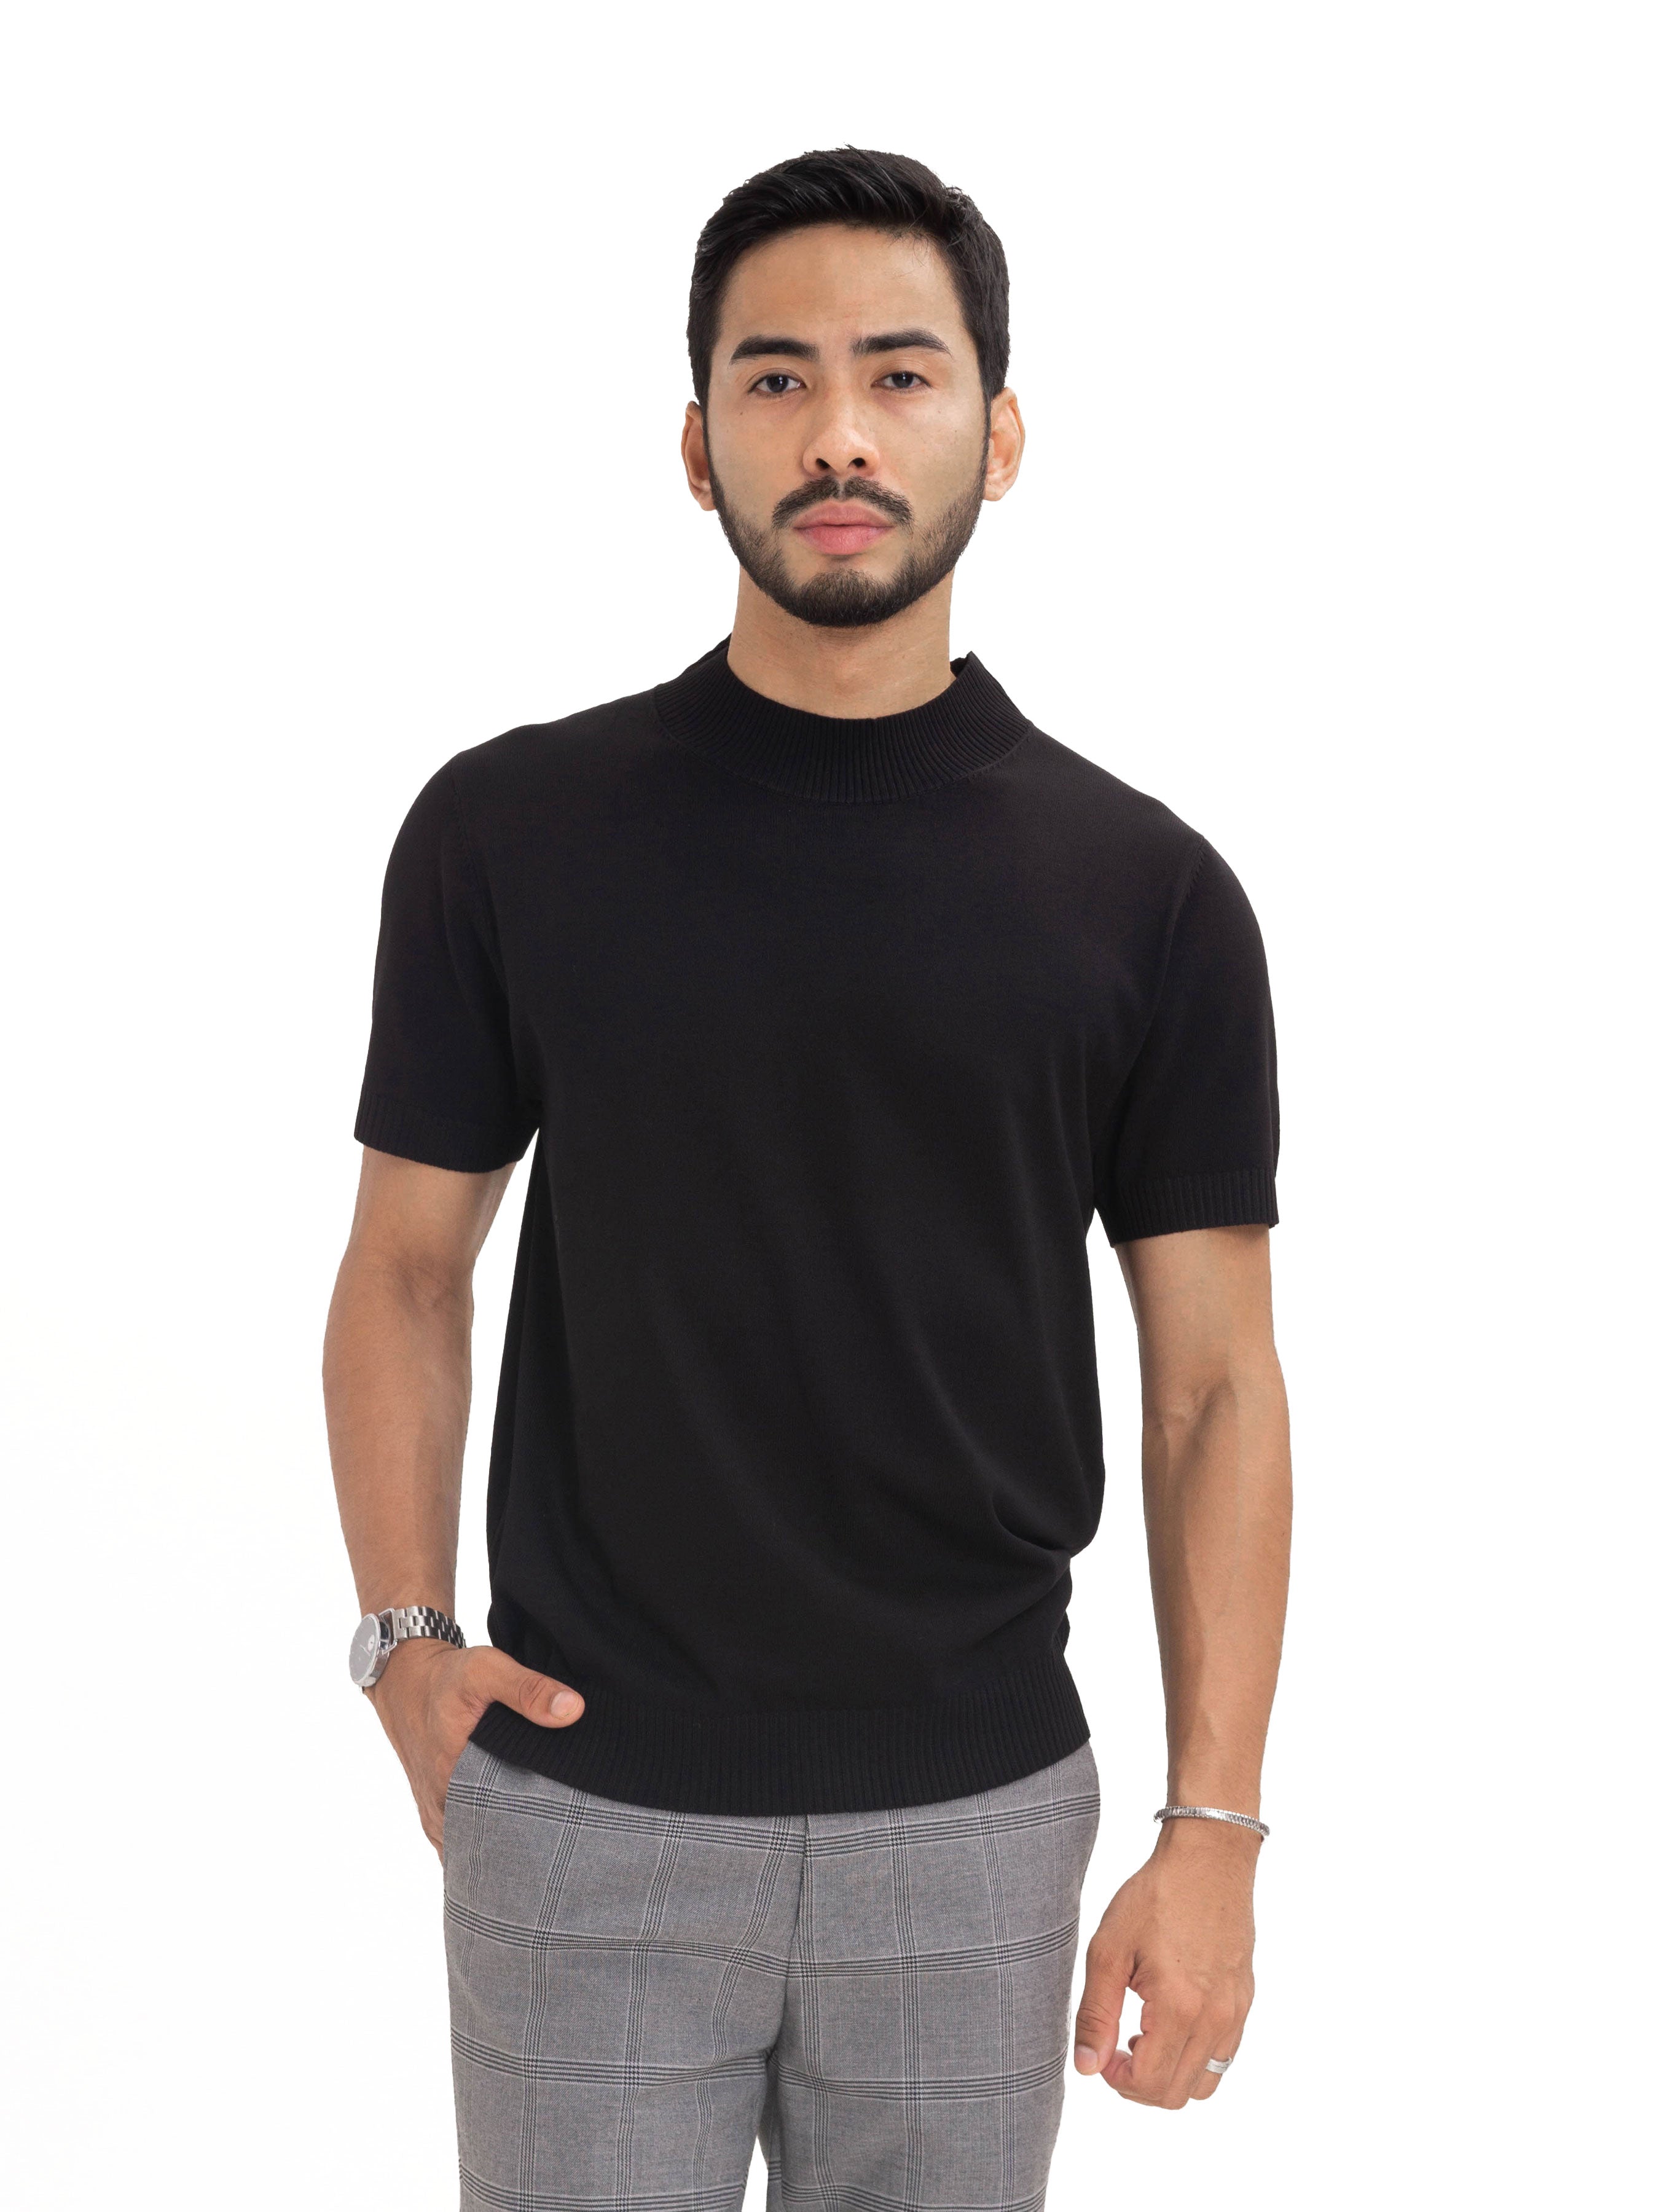 Knit Crew Neck Tee - Black Ribbed Collar - Zeve Shoes